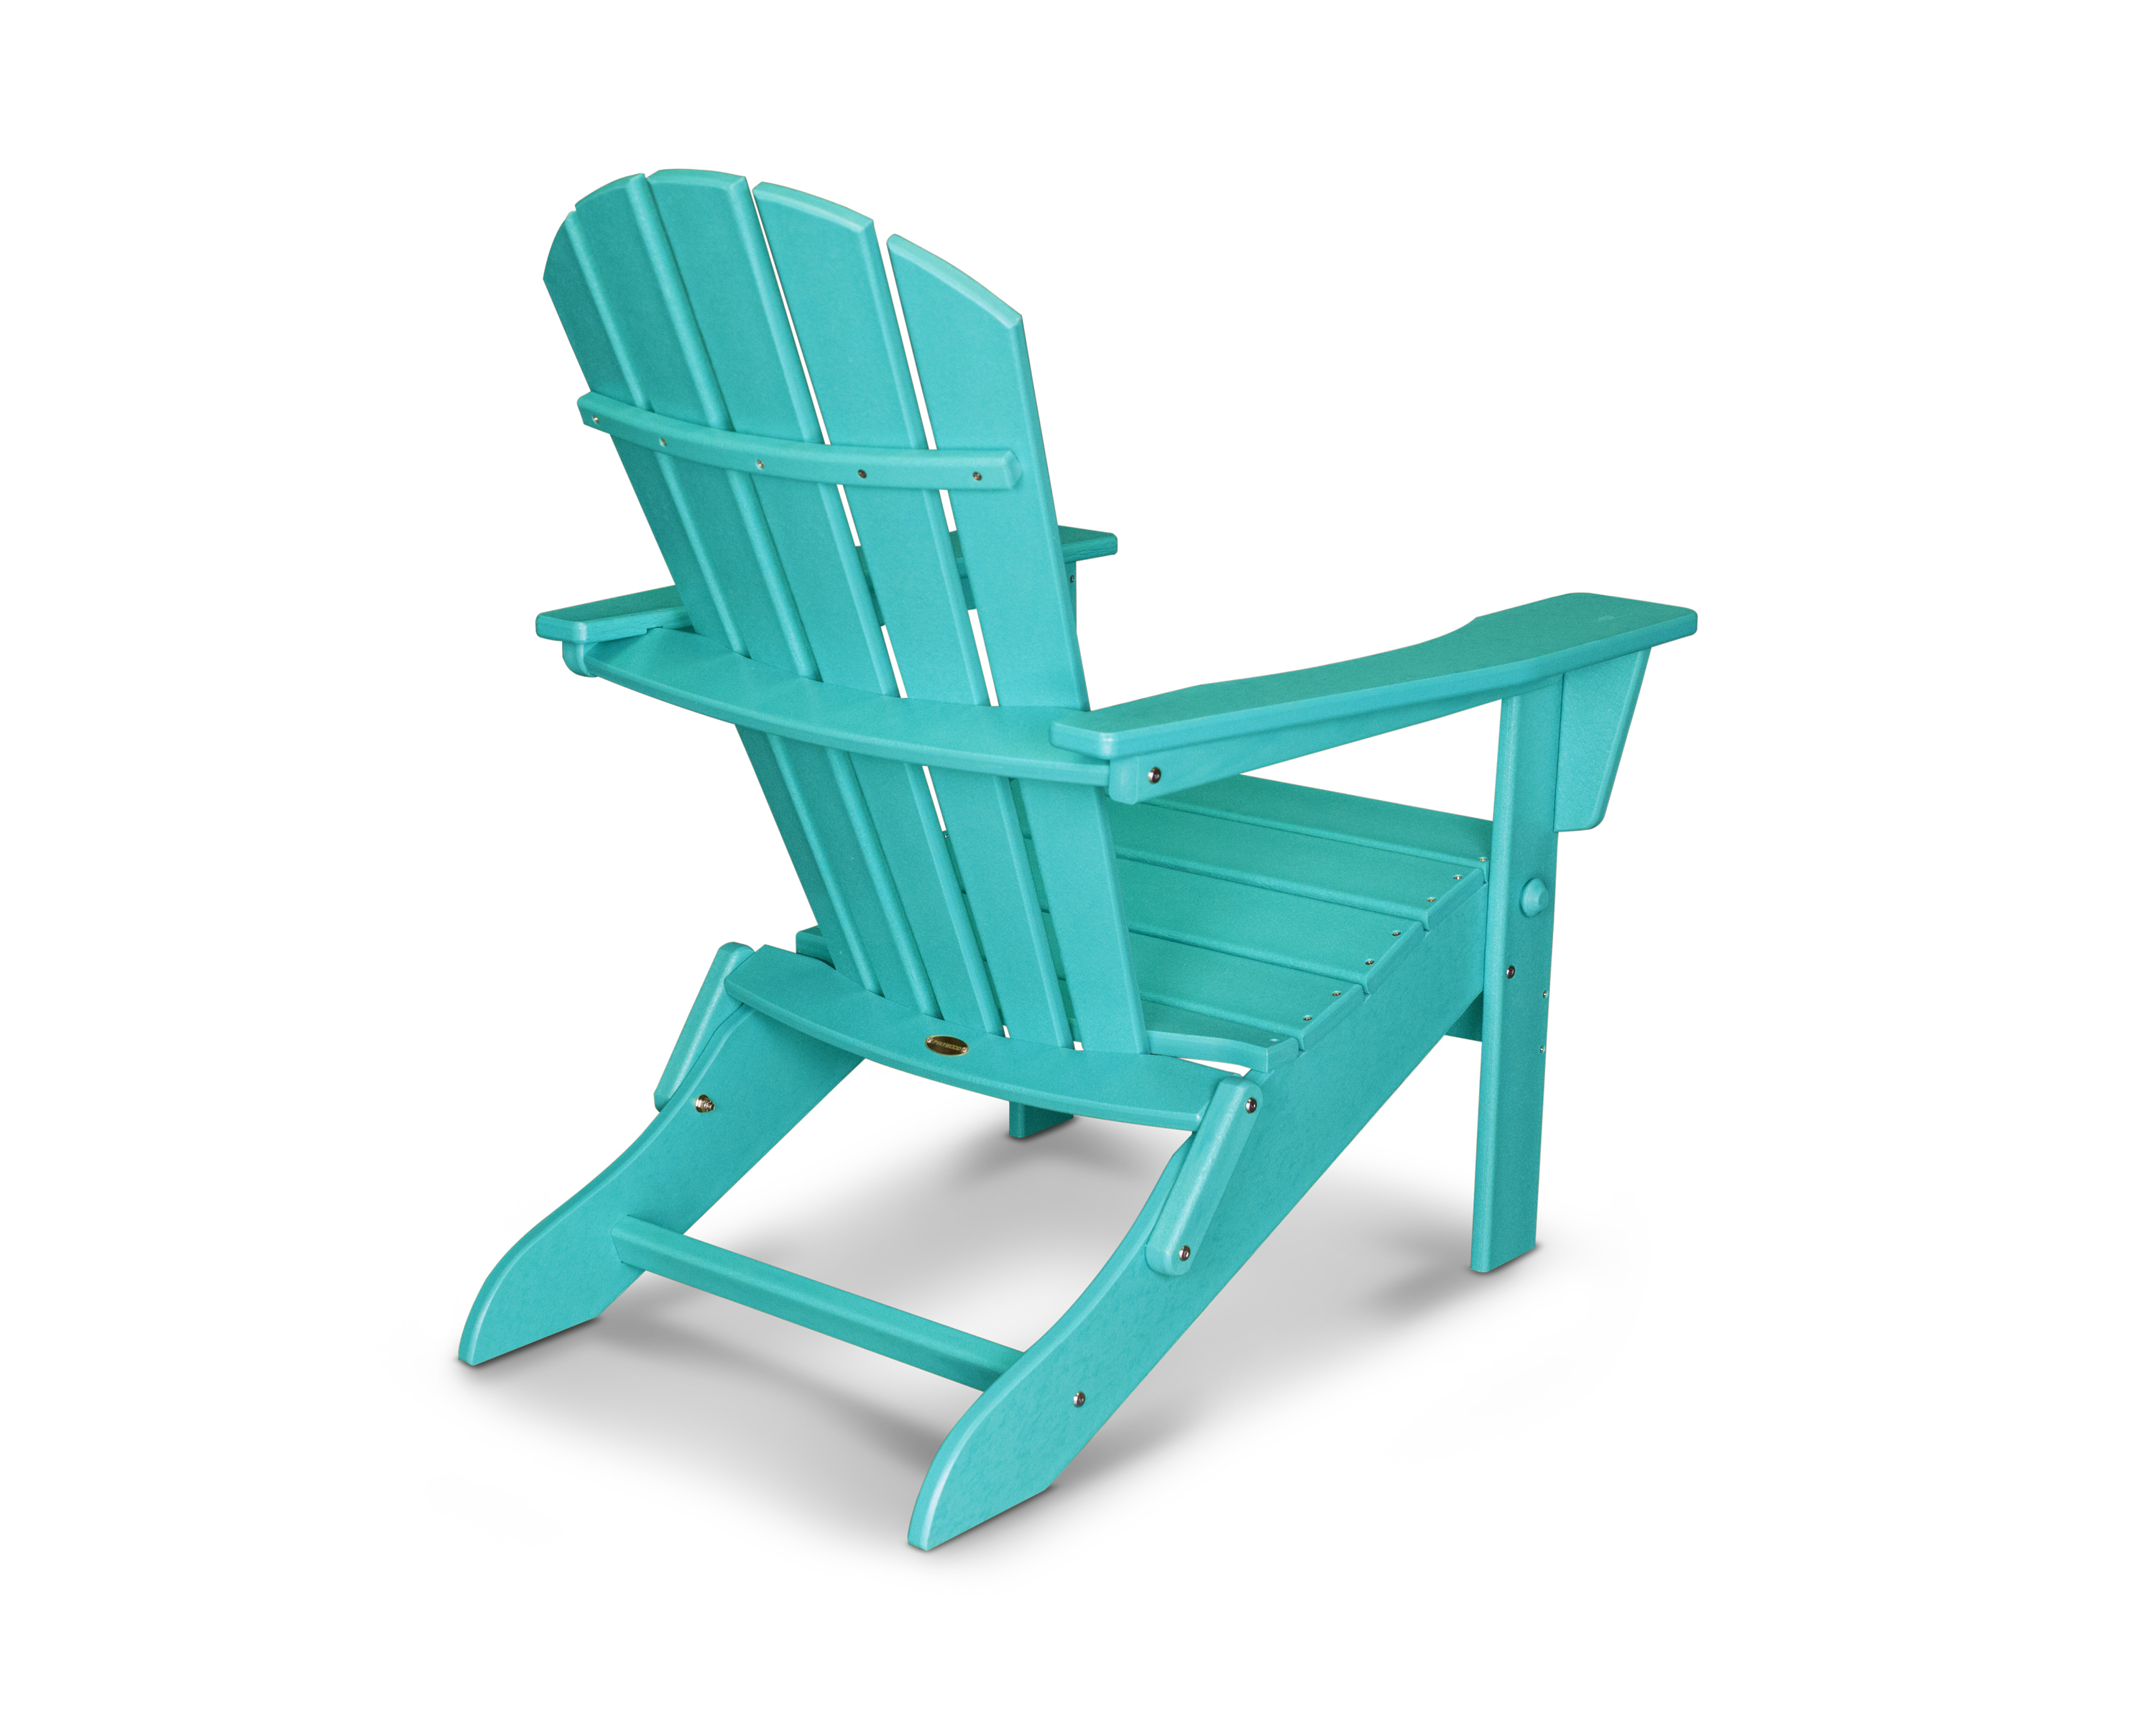 Capable Of Traveling With You Or Staying Right At Home In Your Outdoor Area, The Palm Coast Folding Adirondack Is The Perfect Chair To Save Space While Saving Time On Setup. Maximum Comfort And Functionality Combine To Form This Durable Adirondack. The Hi